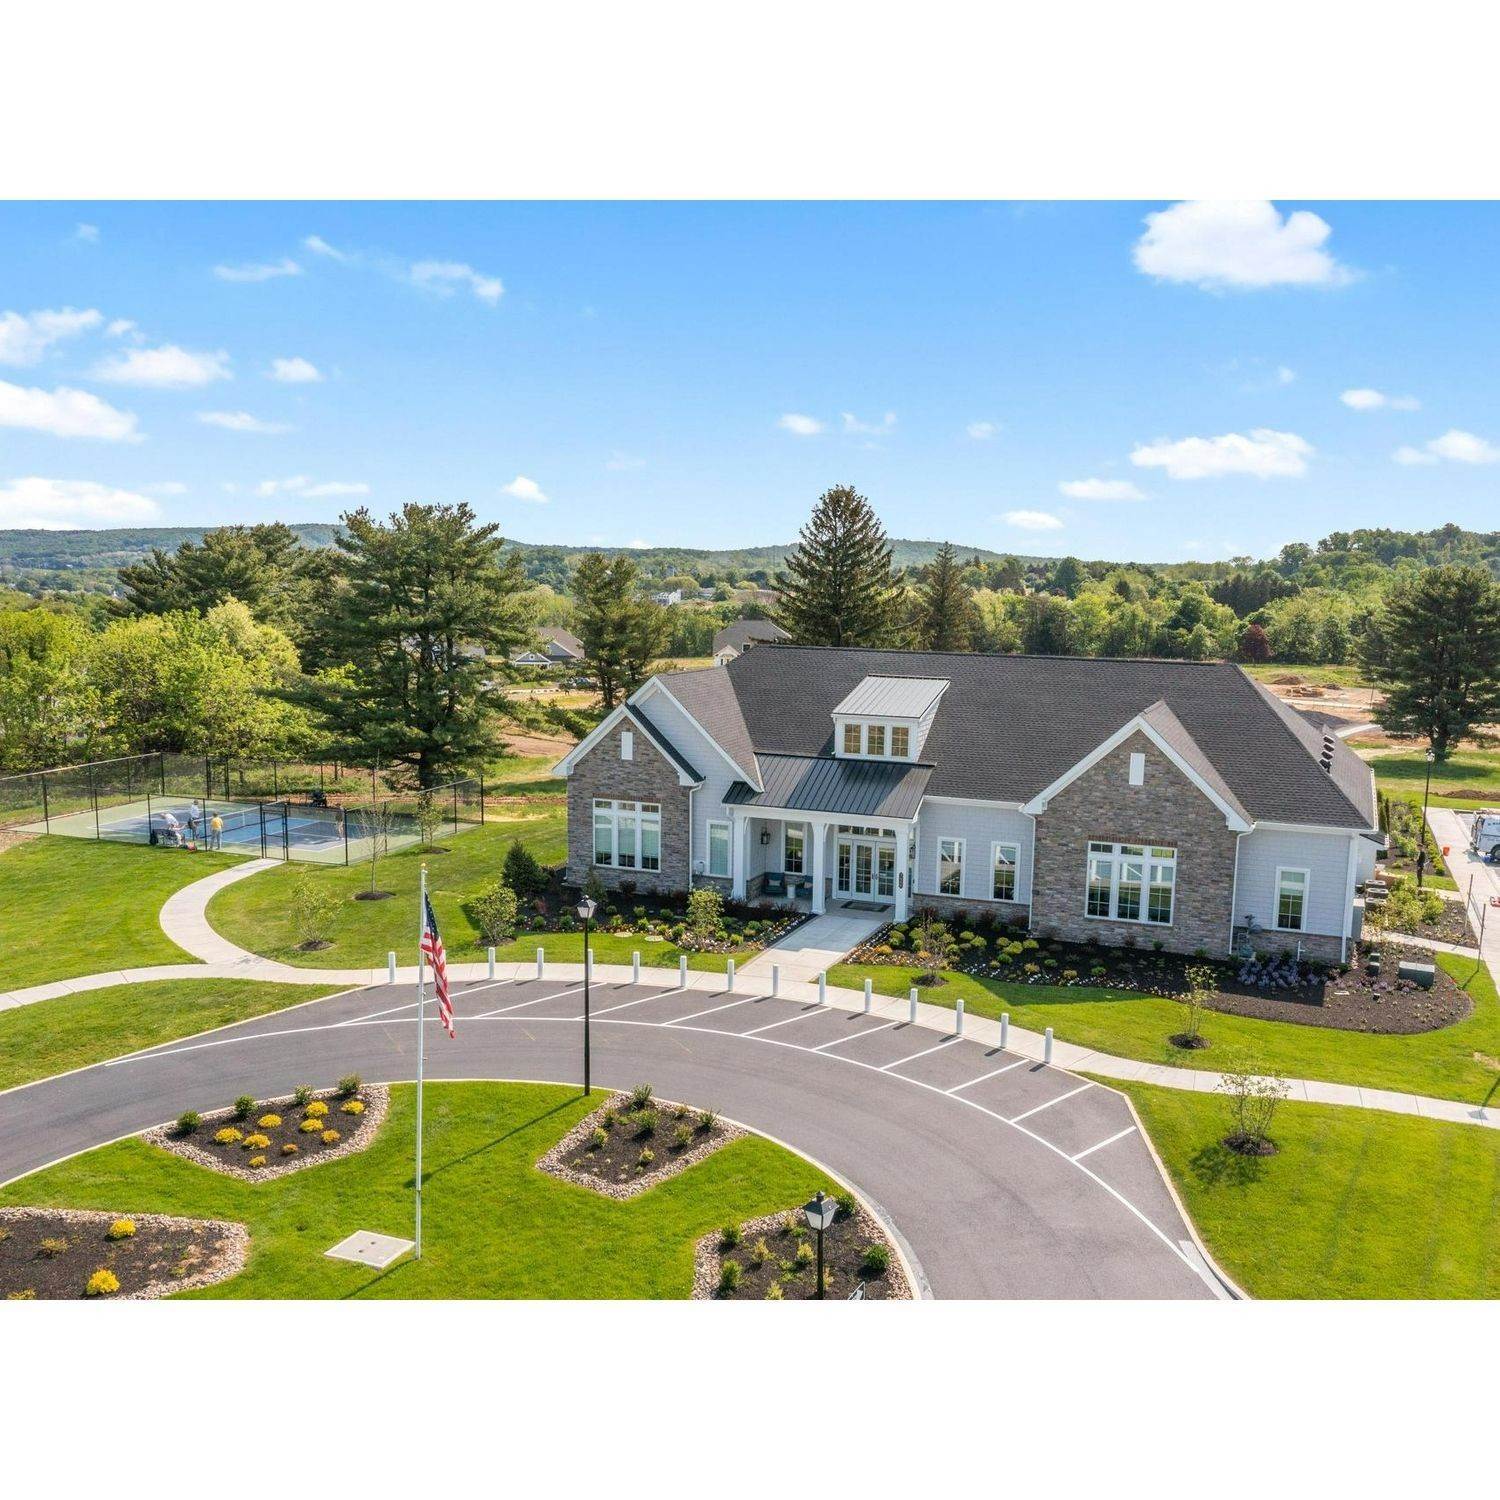 2. Locust Valley 55+ Living building at 7432 Presidents Drive, Coopersburg, PA 18036